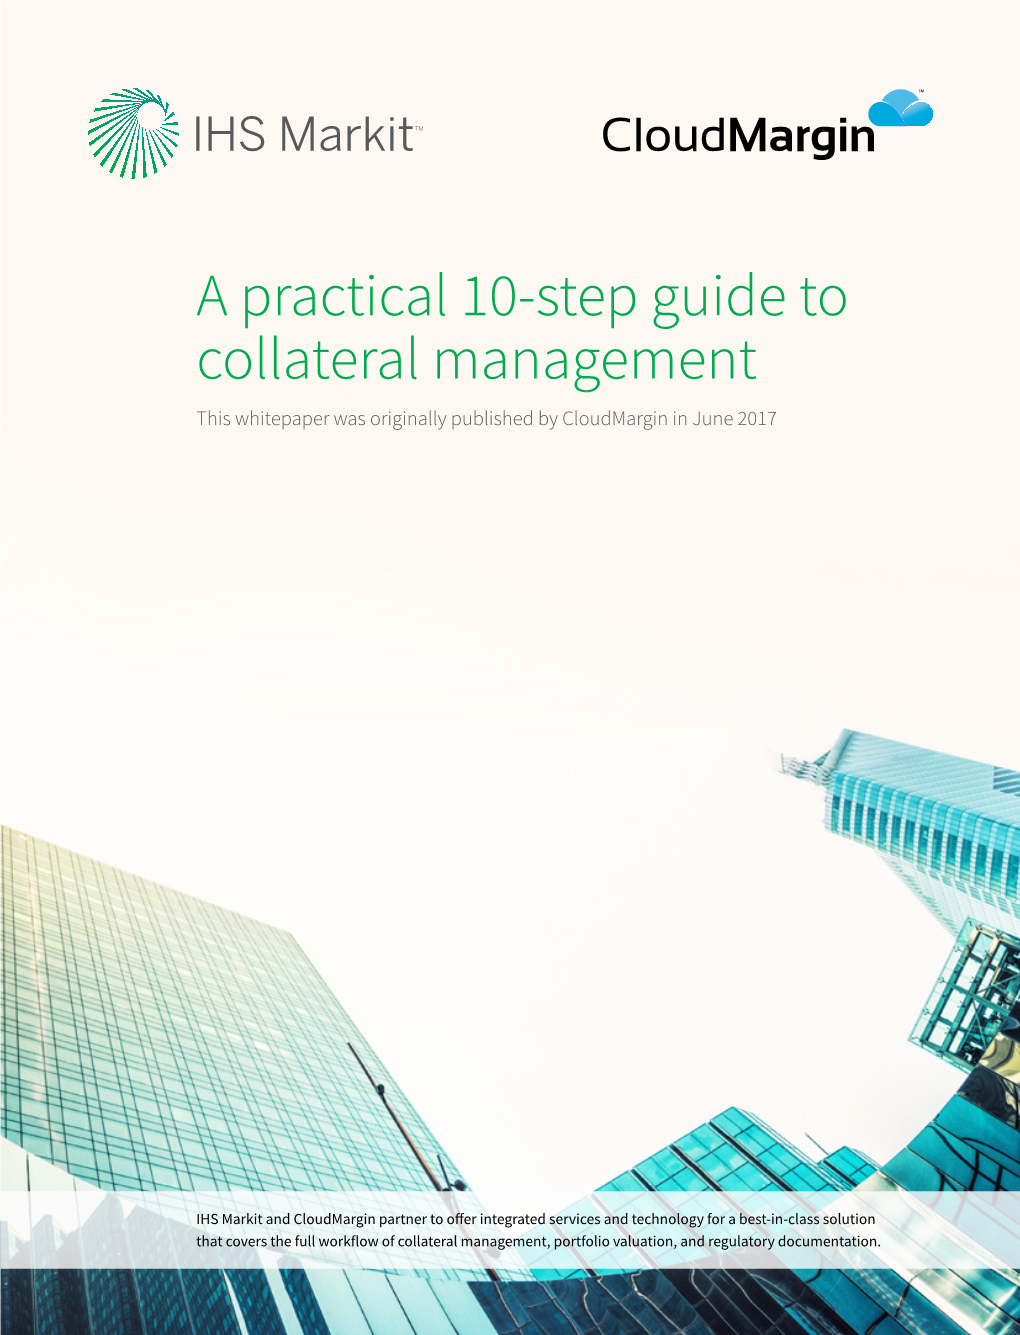 A Practical 10-Step Guide to Collateral Management This Whitepaper Was Originally Published by Cloudmargin in June 2017